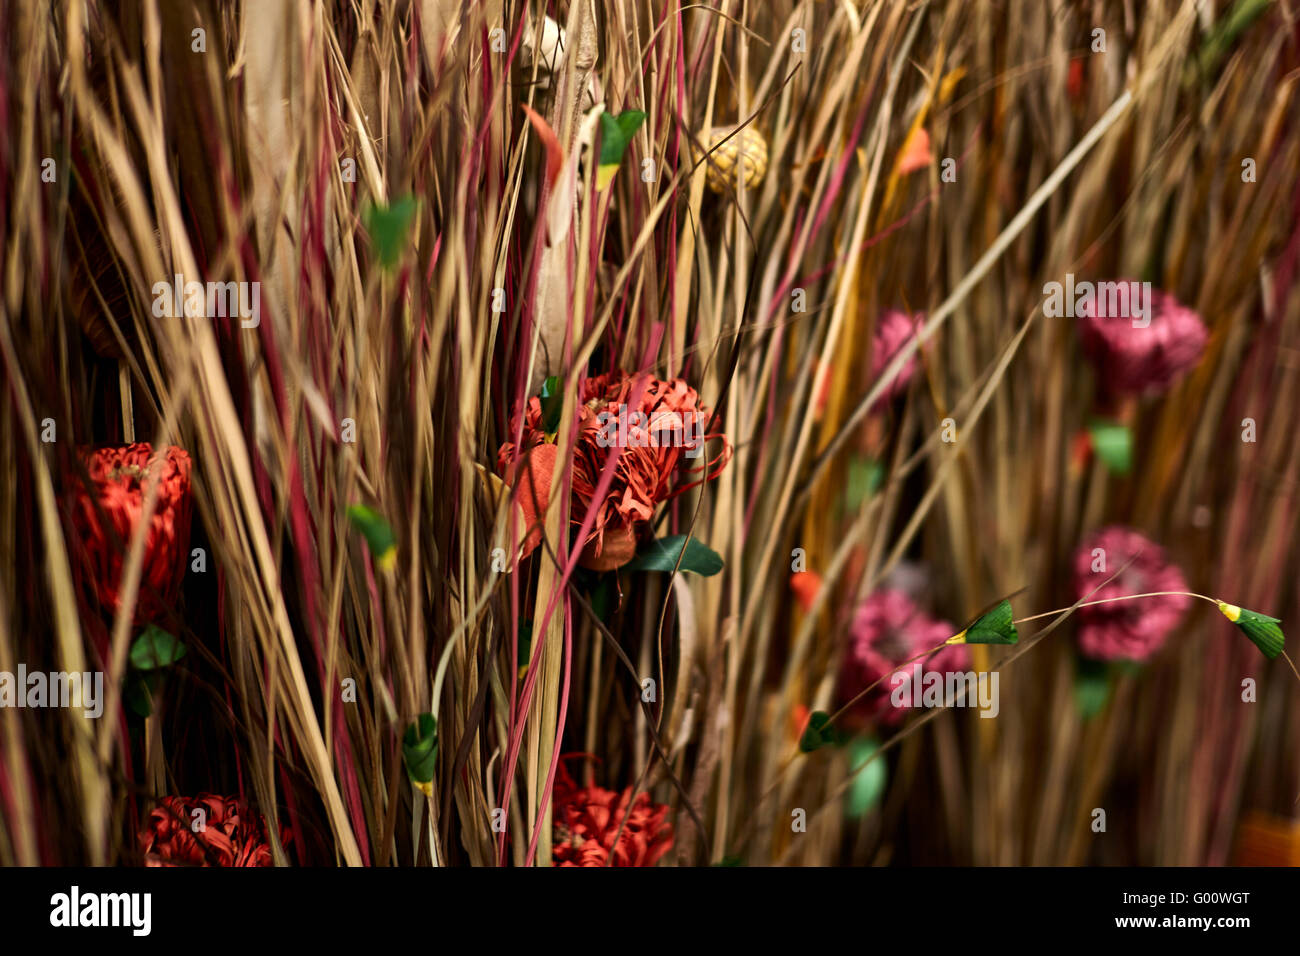 Tall natural fiber dried grasses and dried flowers in a row Stock Photo